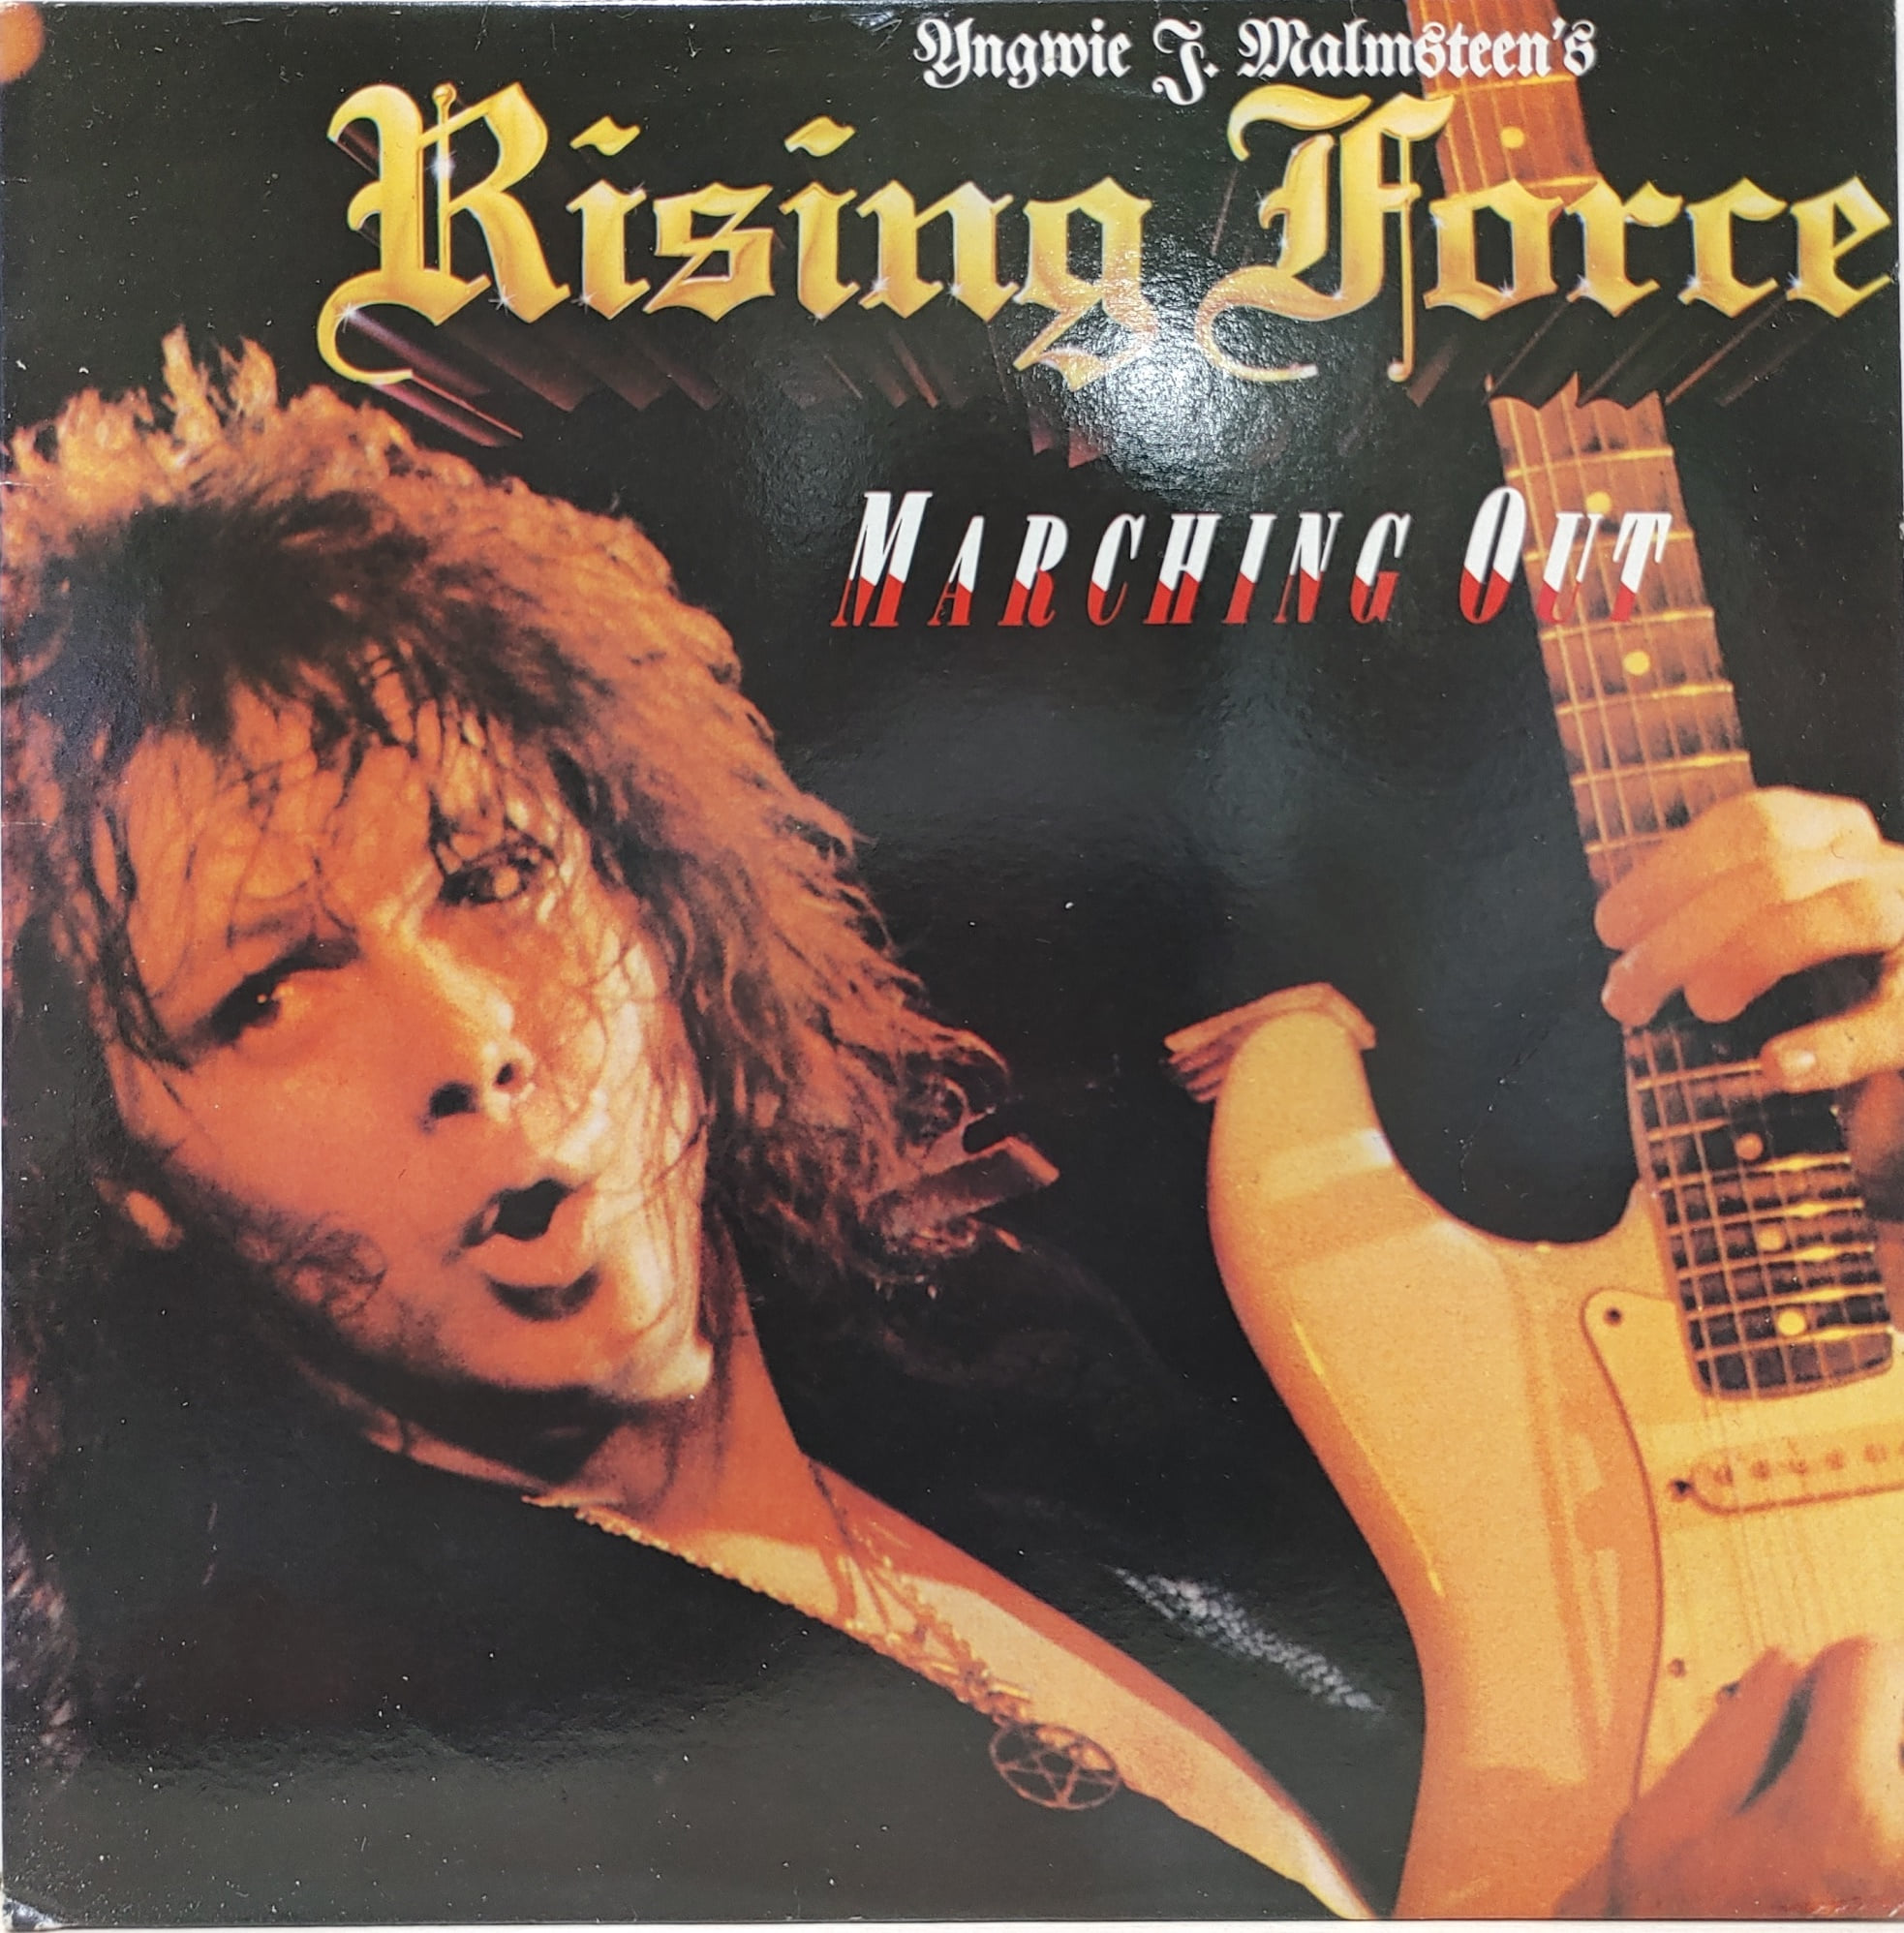 YNGWIE MALMSTEEN / RISING FORCE MARCHING OUT